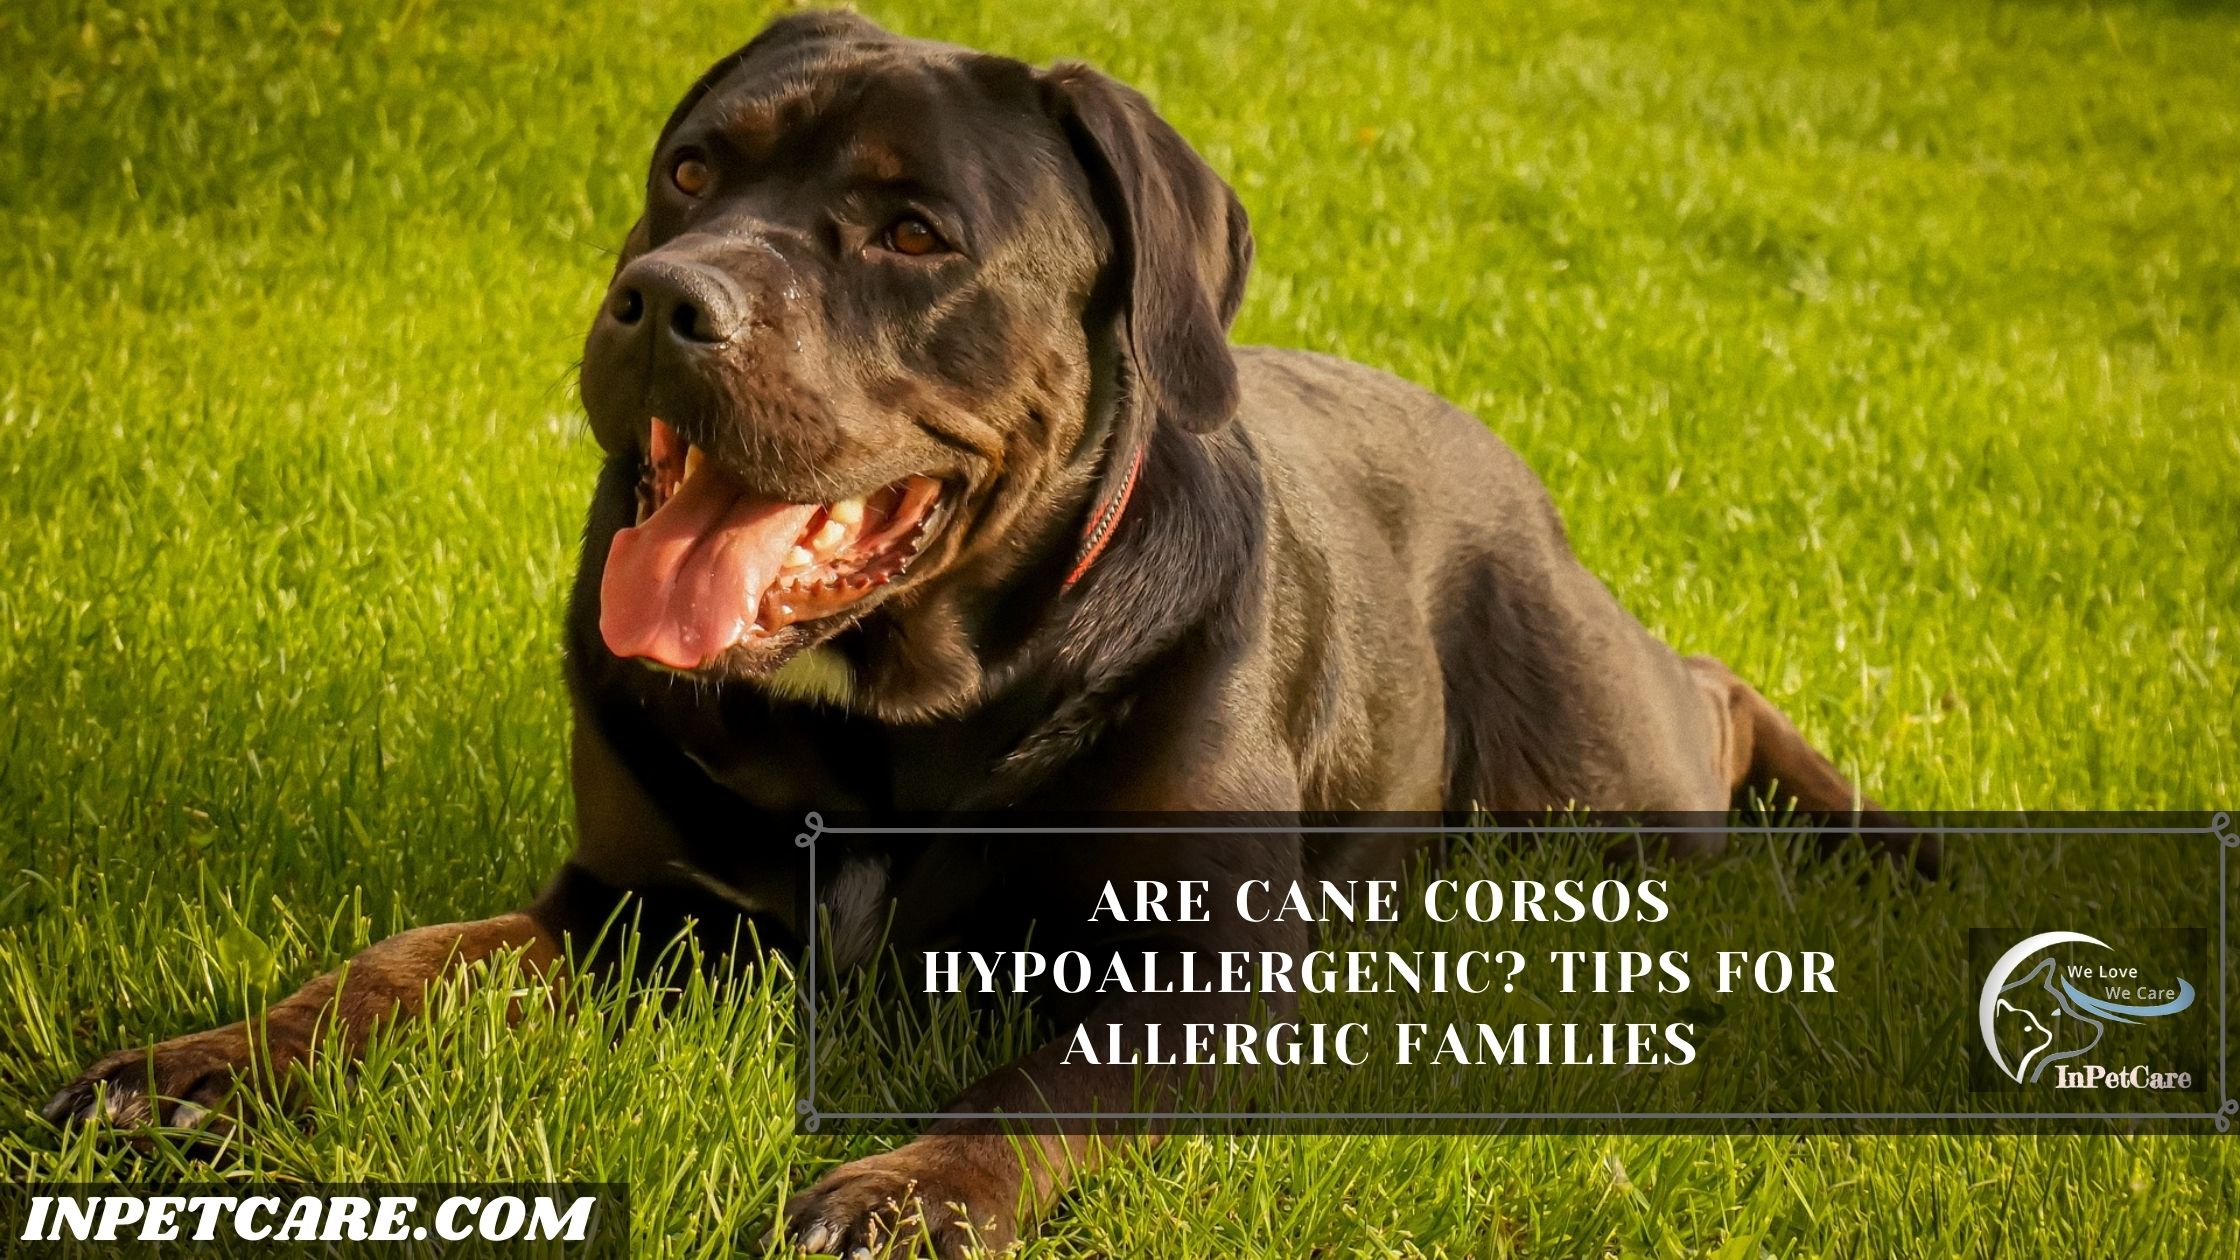 Are Cane Corsos Hypoallergenic? Tips For Allergic Families